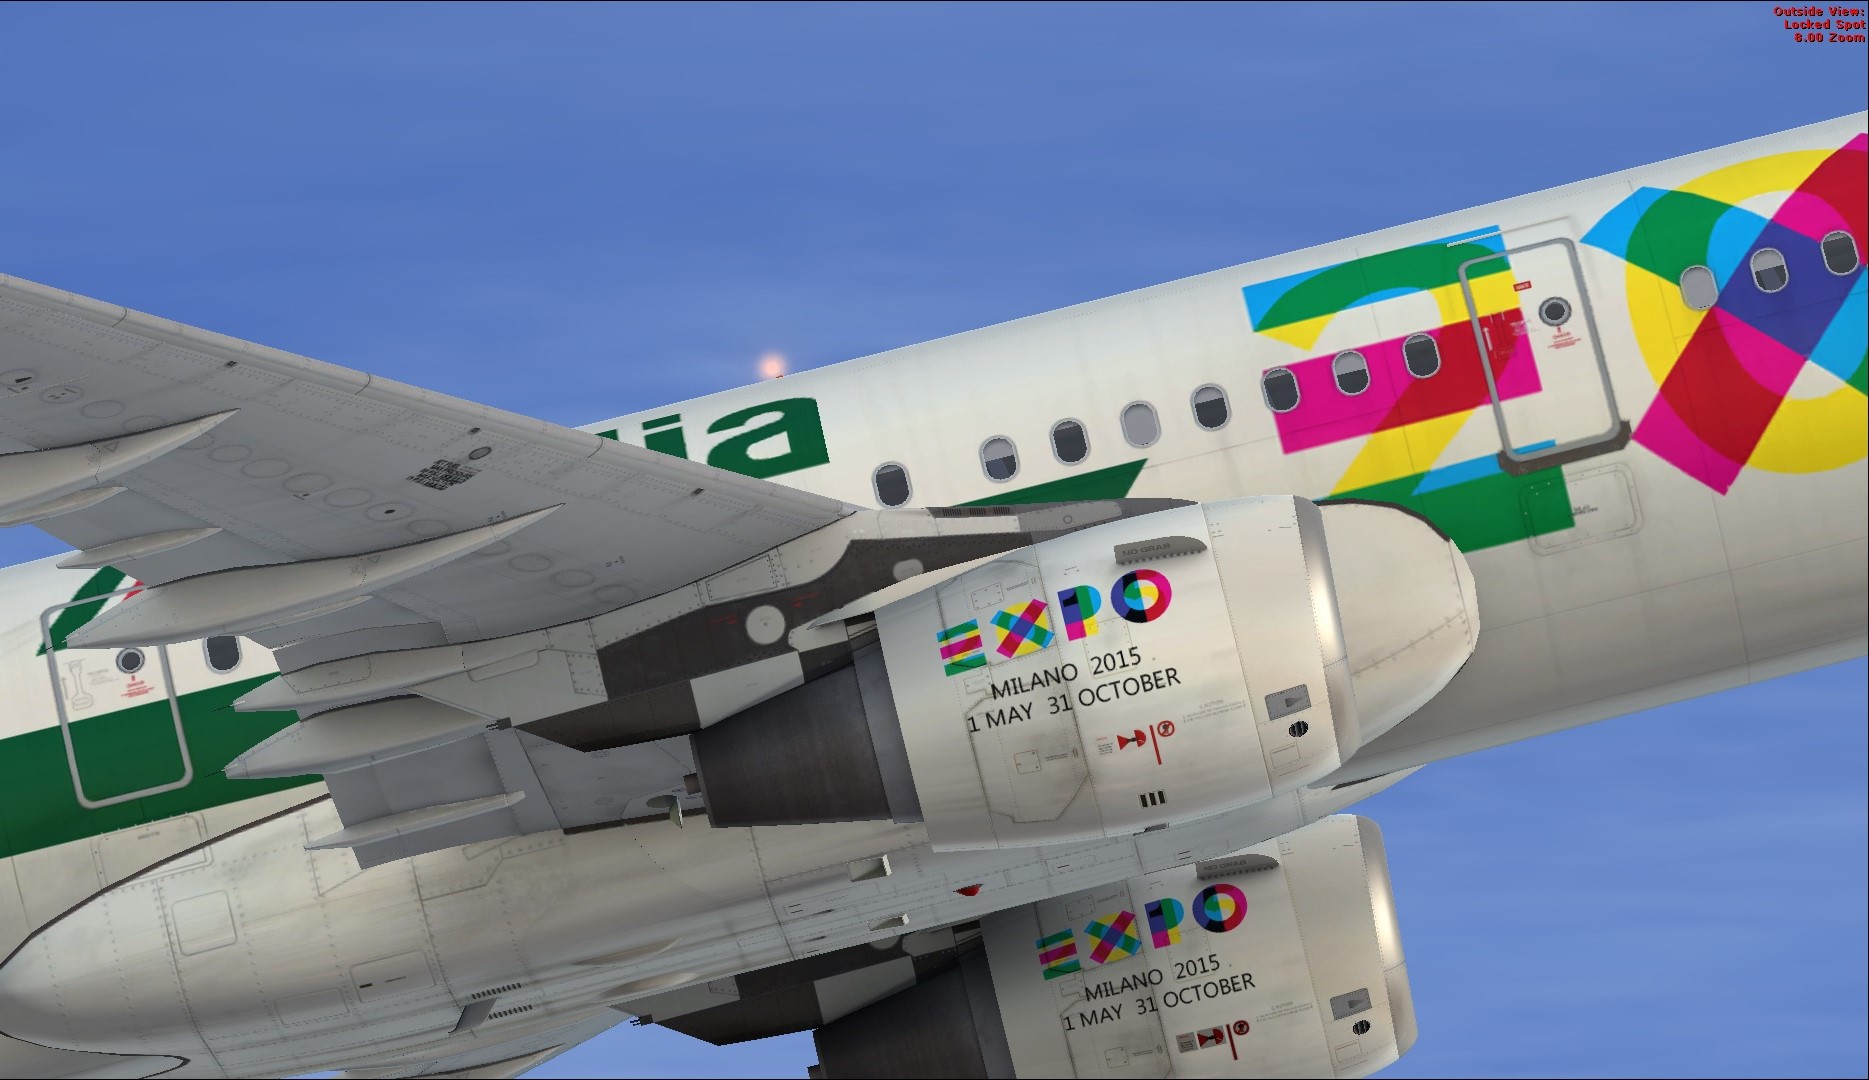 More information about "A321 ALITALIA EXPO LIVERY"